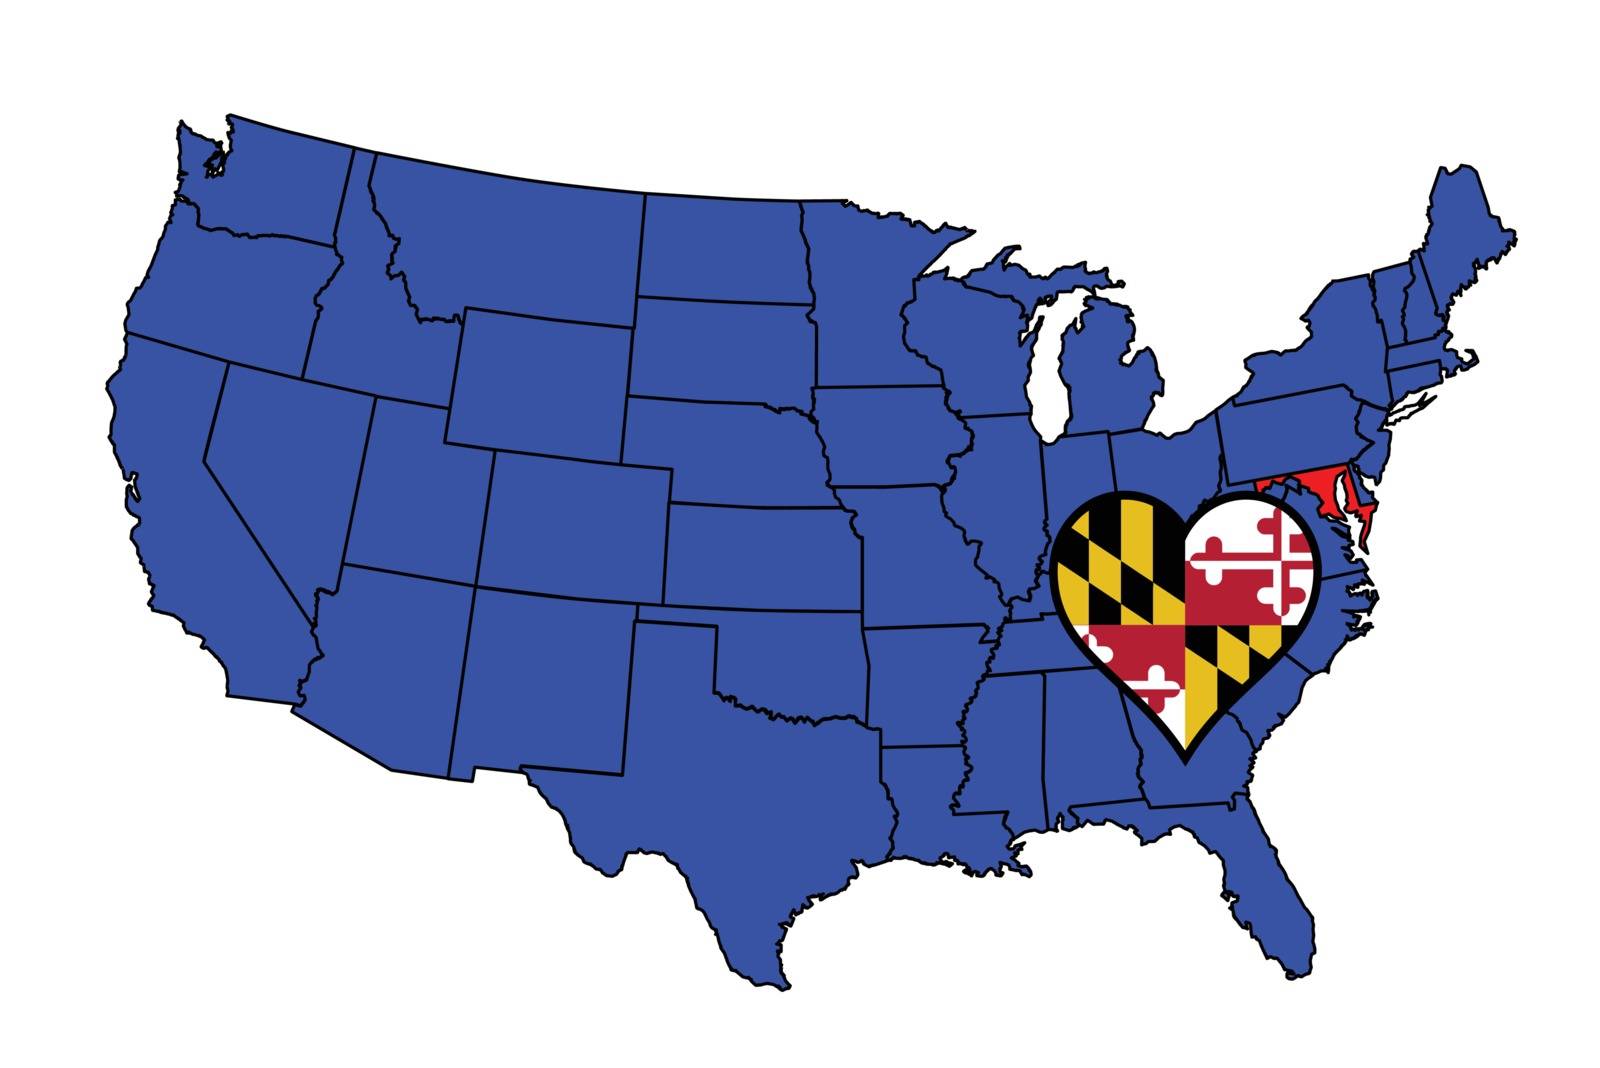 Maryland state outline and icon inset set into a map of The United States of America